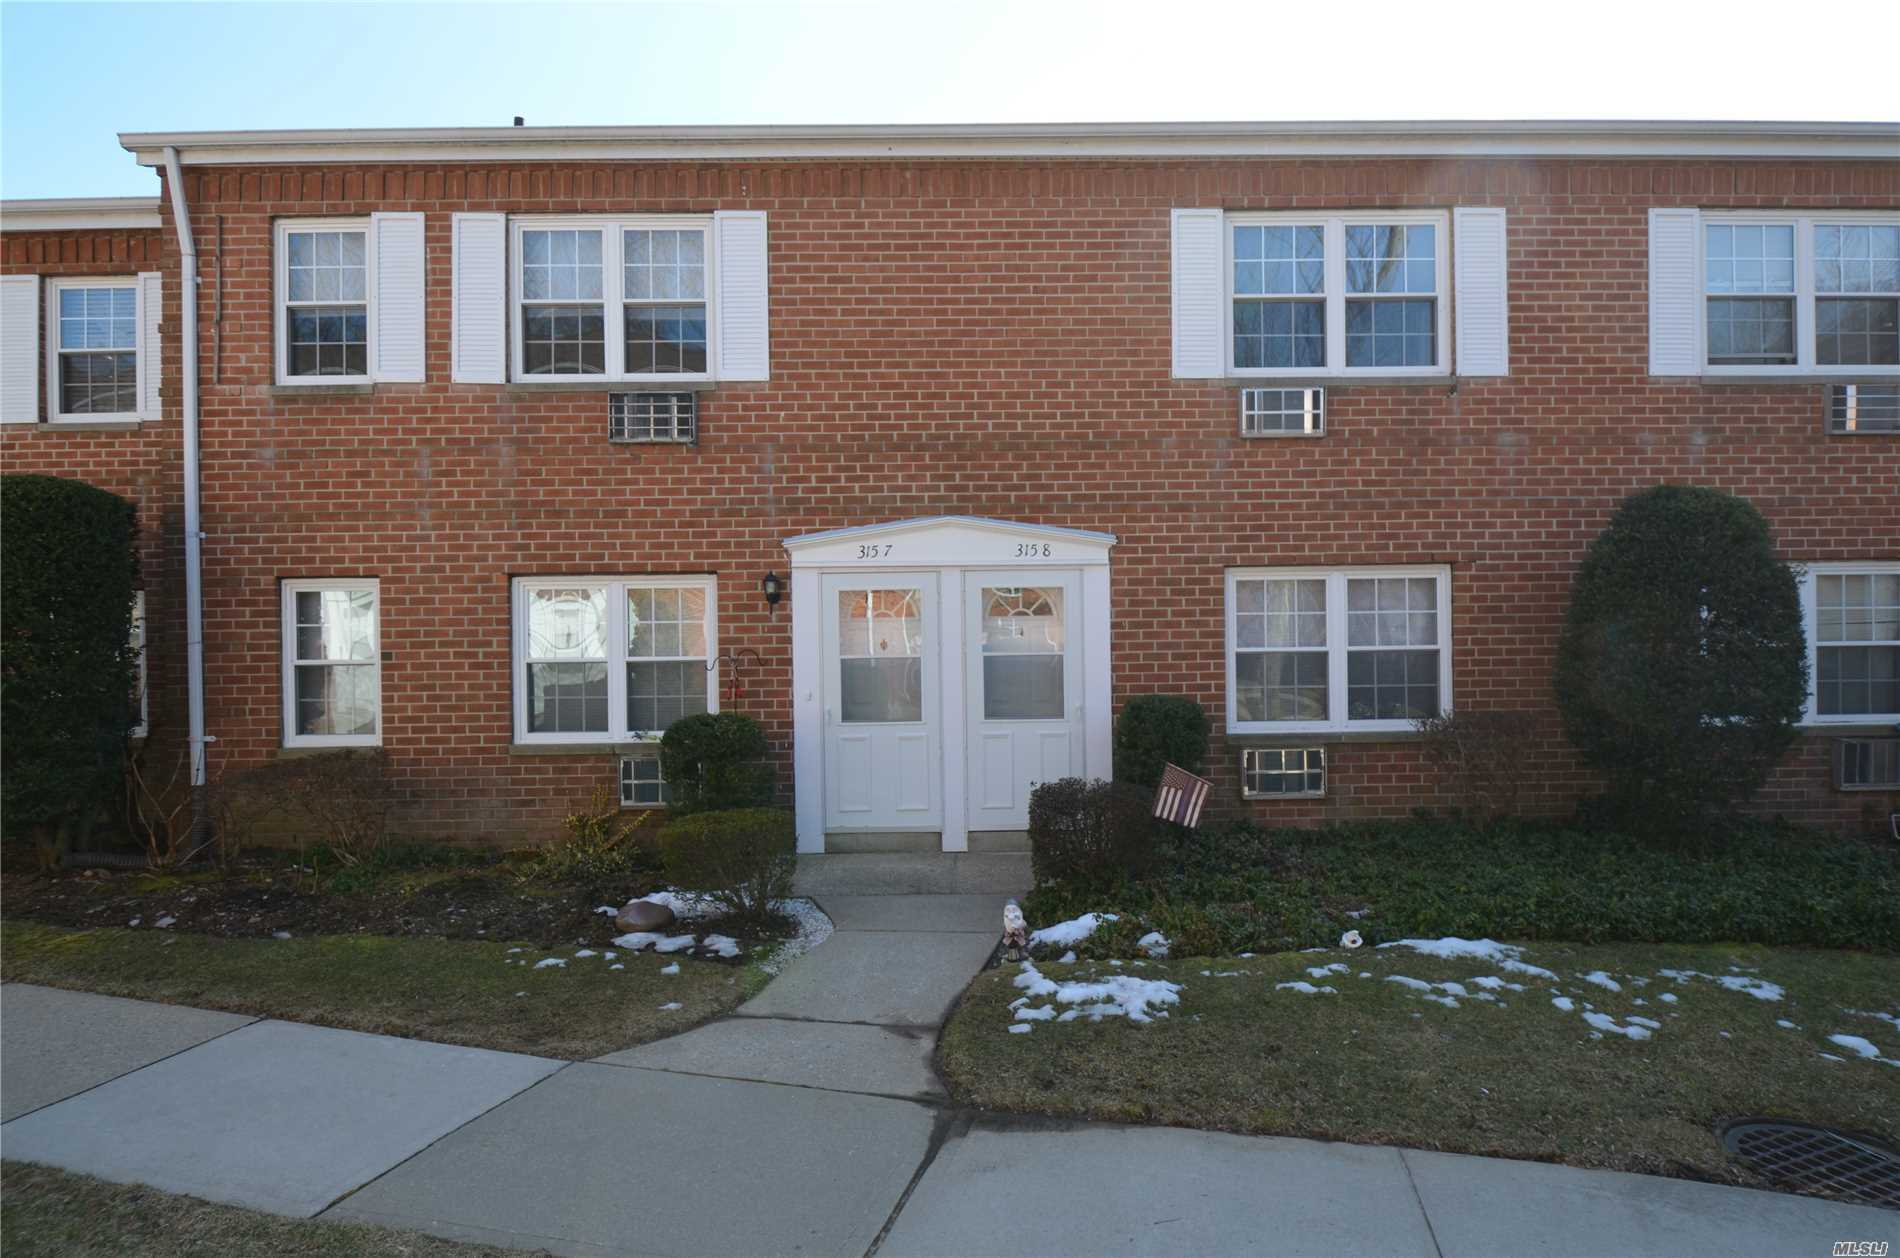 Spacious 1 Bedroom Co-Op in Great Location offer Living room, Dining Area, Brand New tiled Bathroom, Large Bedroom with Double closets, Eff Kitchen with gas cooking, near shops and LIRR, assigned parking space plus guest parking, Laundry Room, Additional Storage. Pool coming soon.